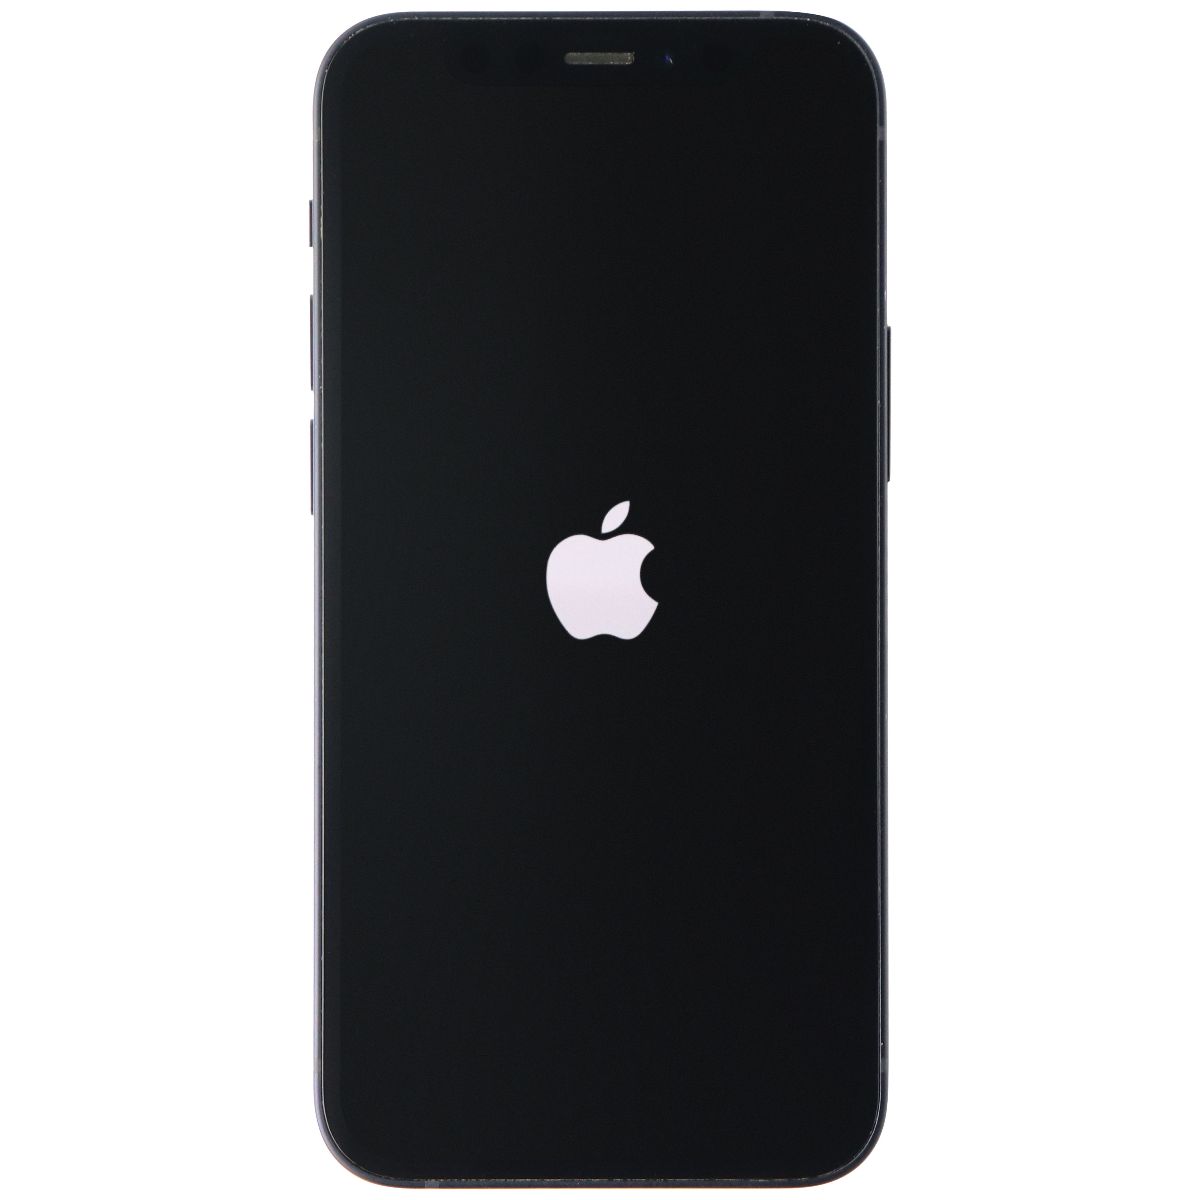 Apple iPhone 12 Mini (5.4-inch) Smartphone (A2176) Verizon Only 64GB / Black Cell Phones & Smartphones Apple    - Simple Cell Bulk Wholesale Pricing - USA Seller